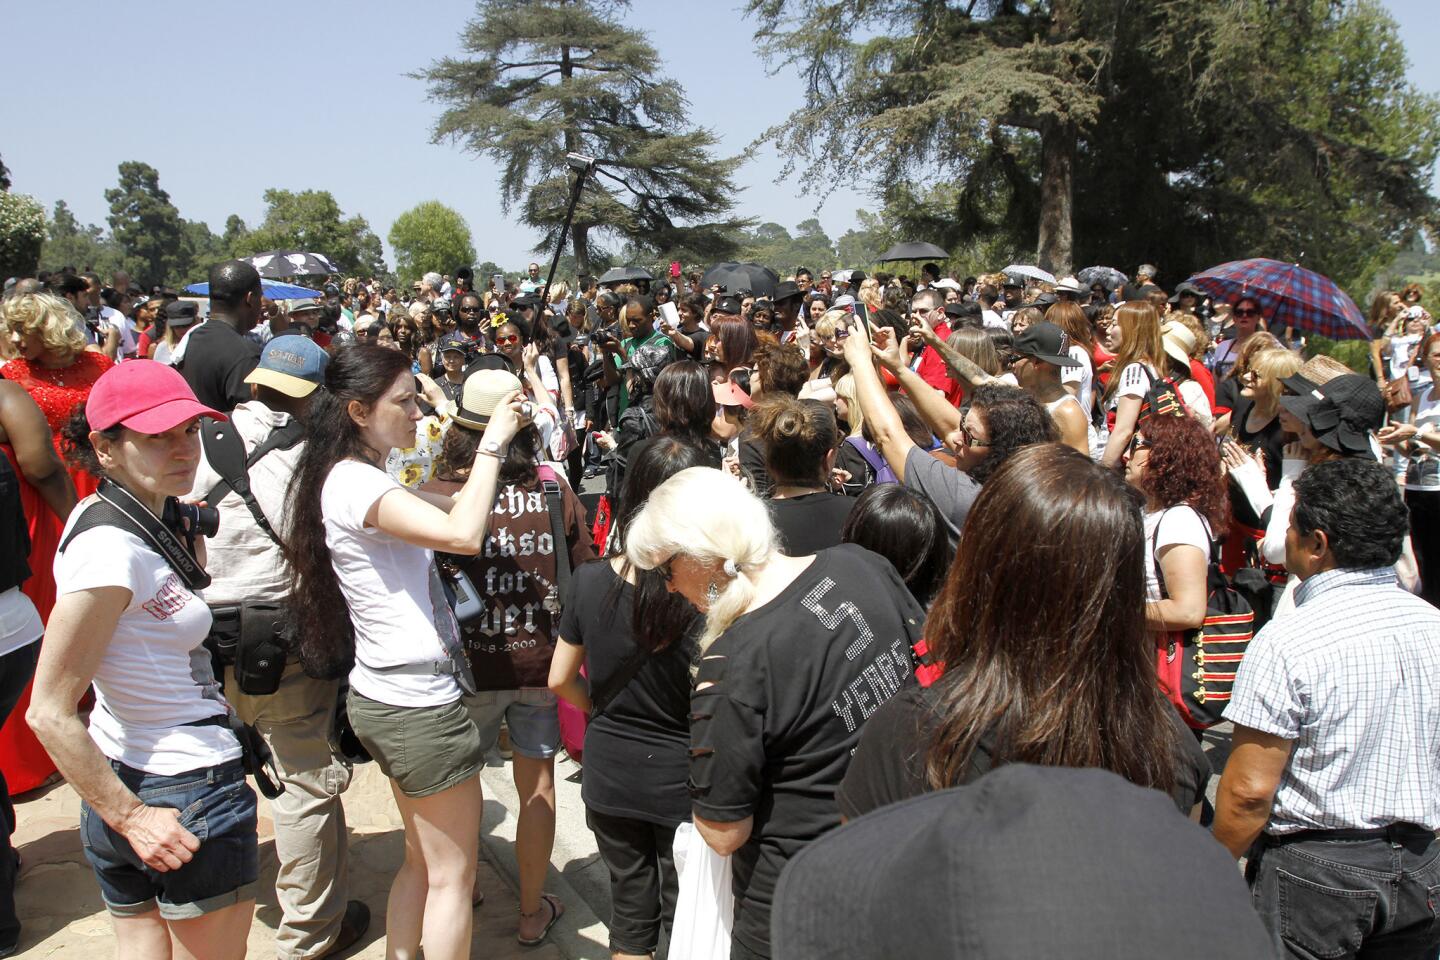 Photo Gallery: Michael Jackson fans arrive at Forest Lawn Glendale on 5th Anniversary of his death